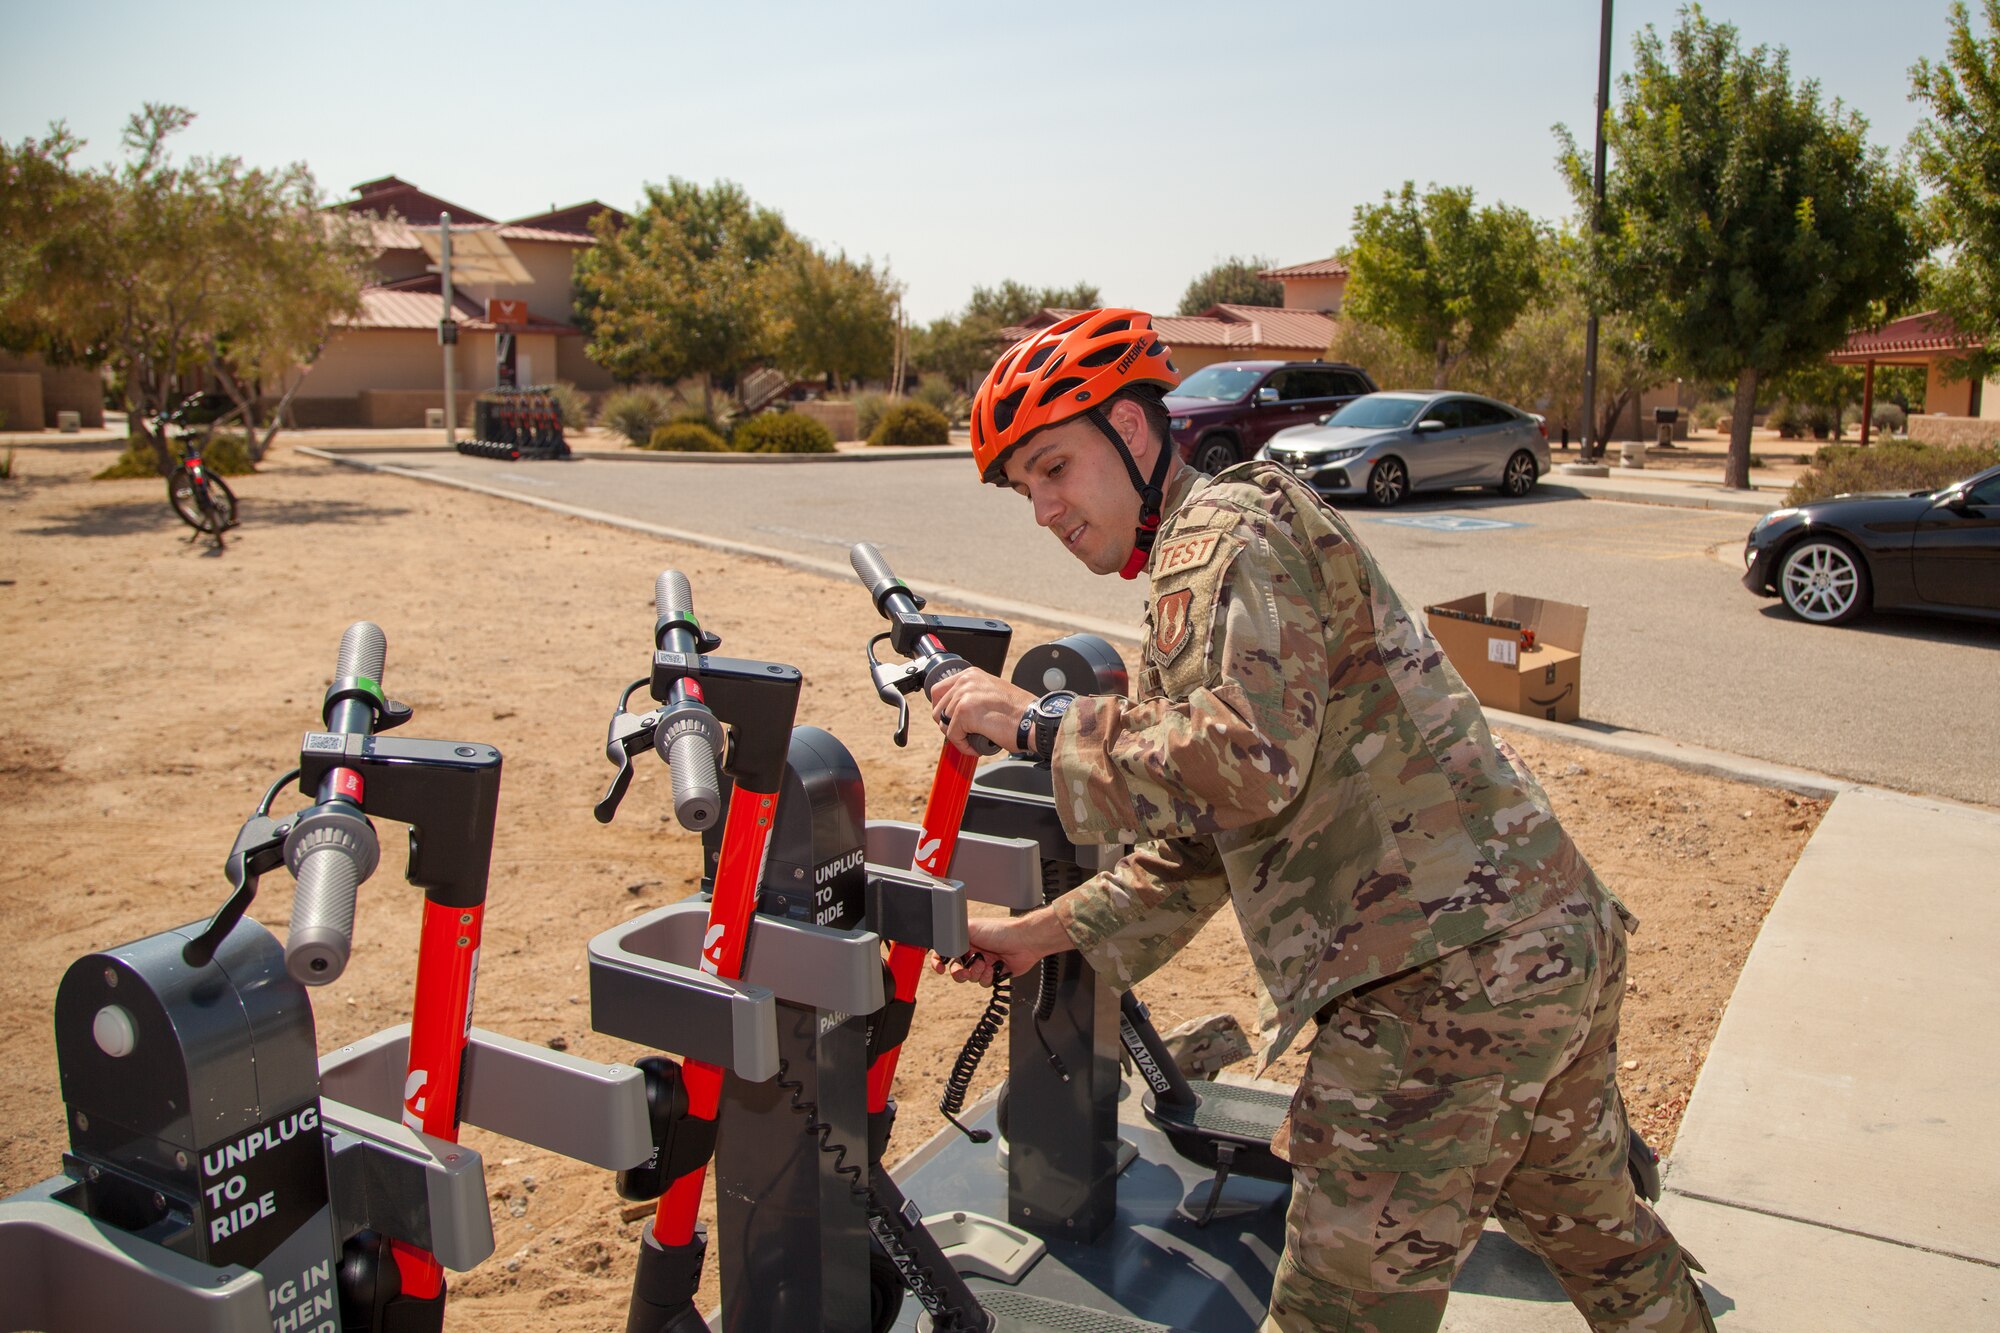 Master Sgt. Chad Hardesy, 412th Security Forces Squadron, demonstrates the new Spin scooters near the Airmen dormitories at Edwards Air Force Base, California, during the projects launch Sept. 2. (Air Force photo by Ethan Wagner)